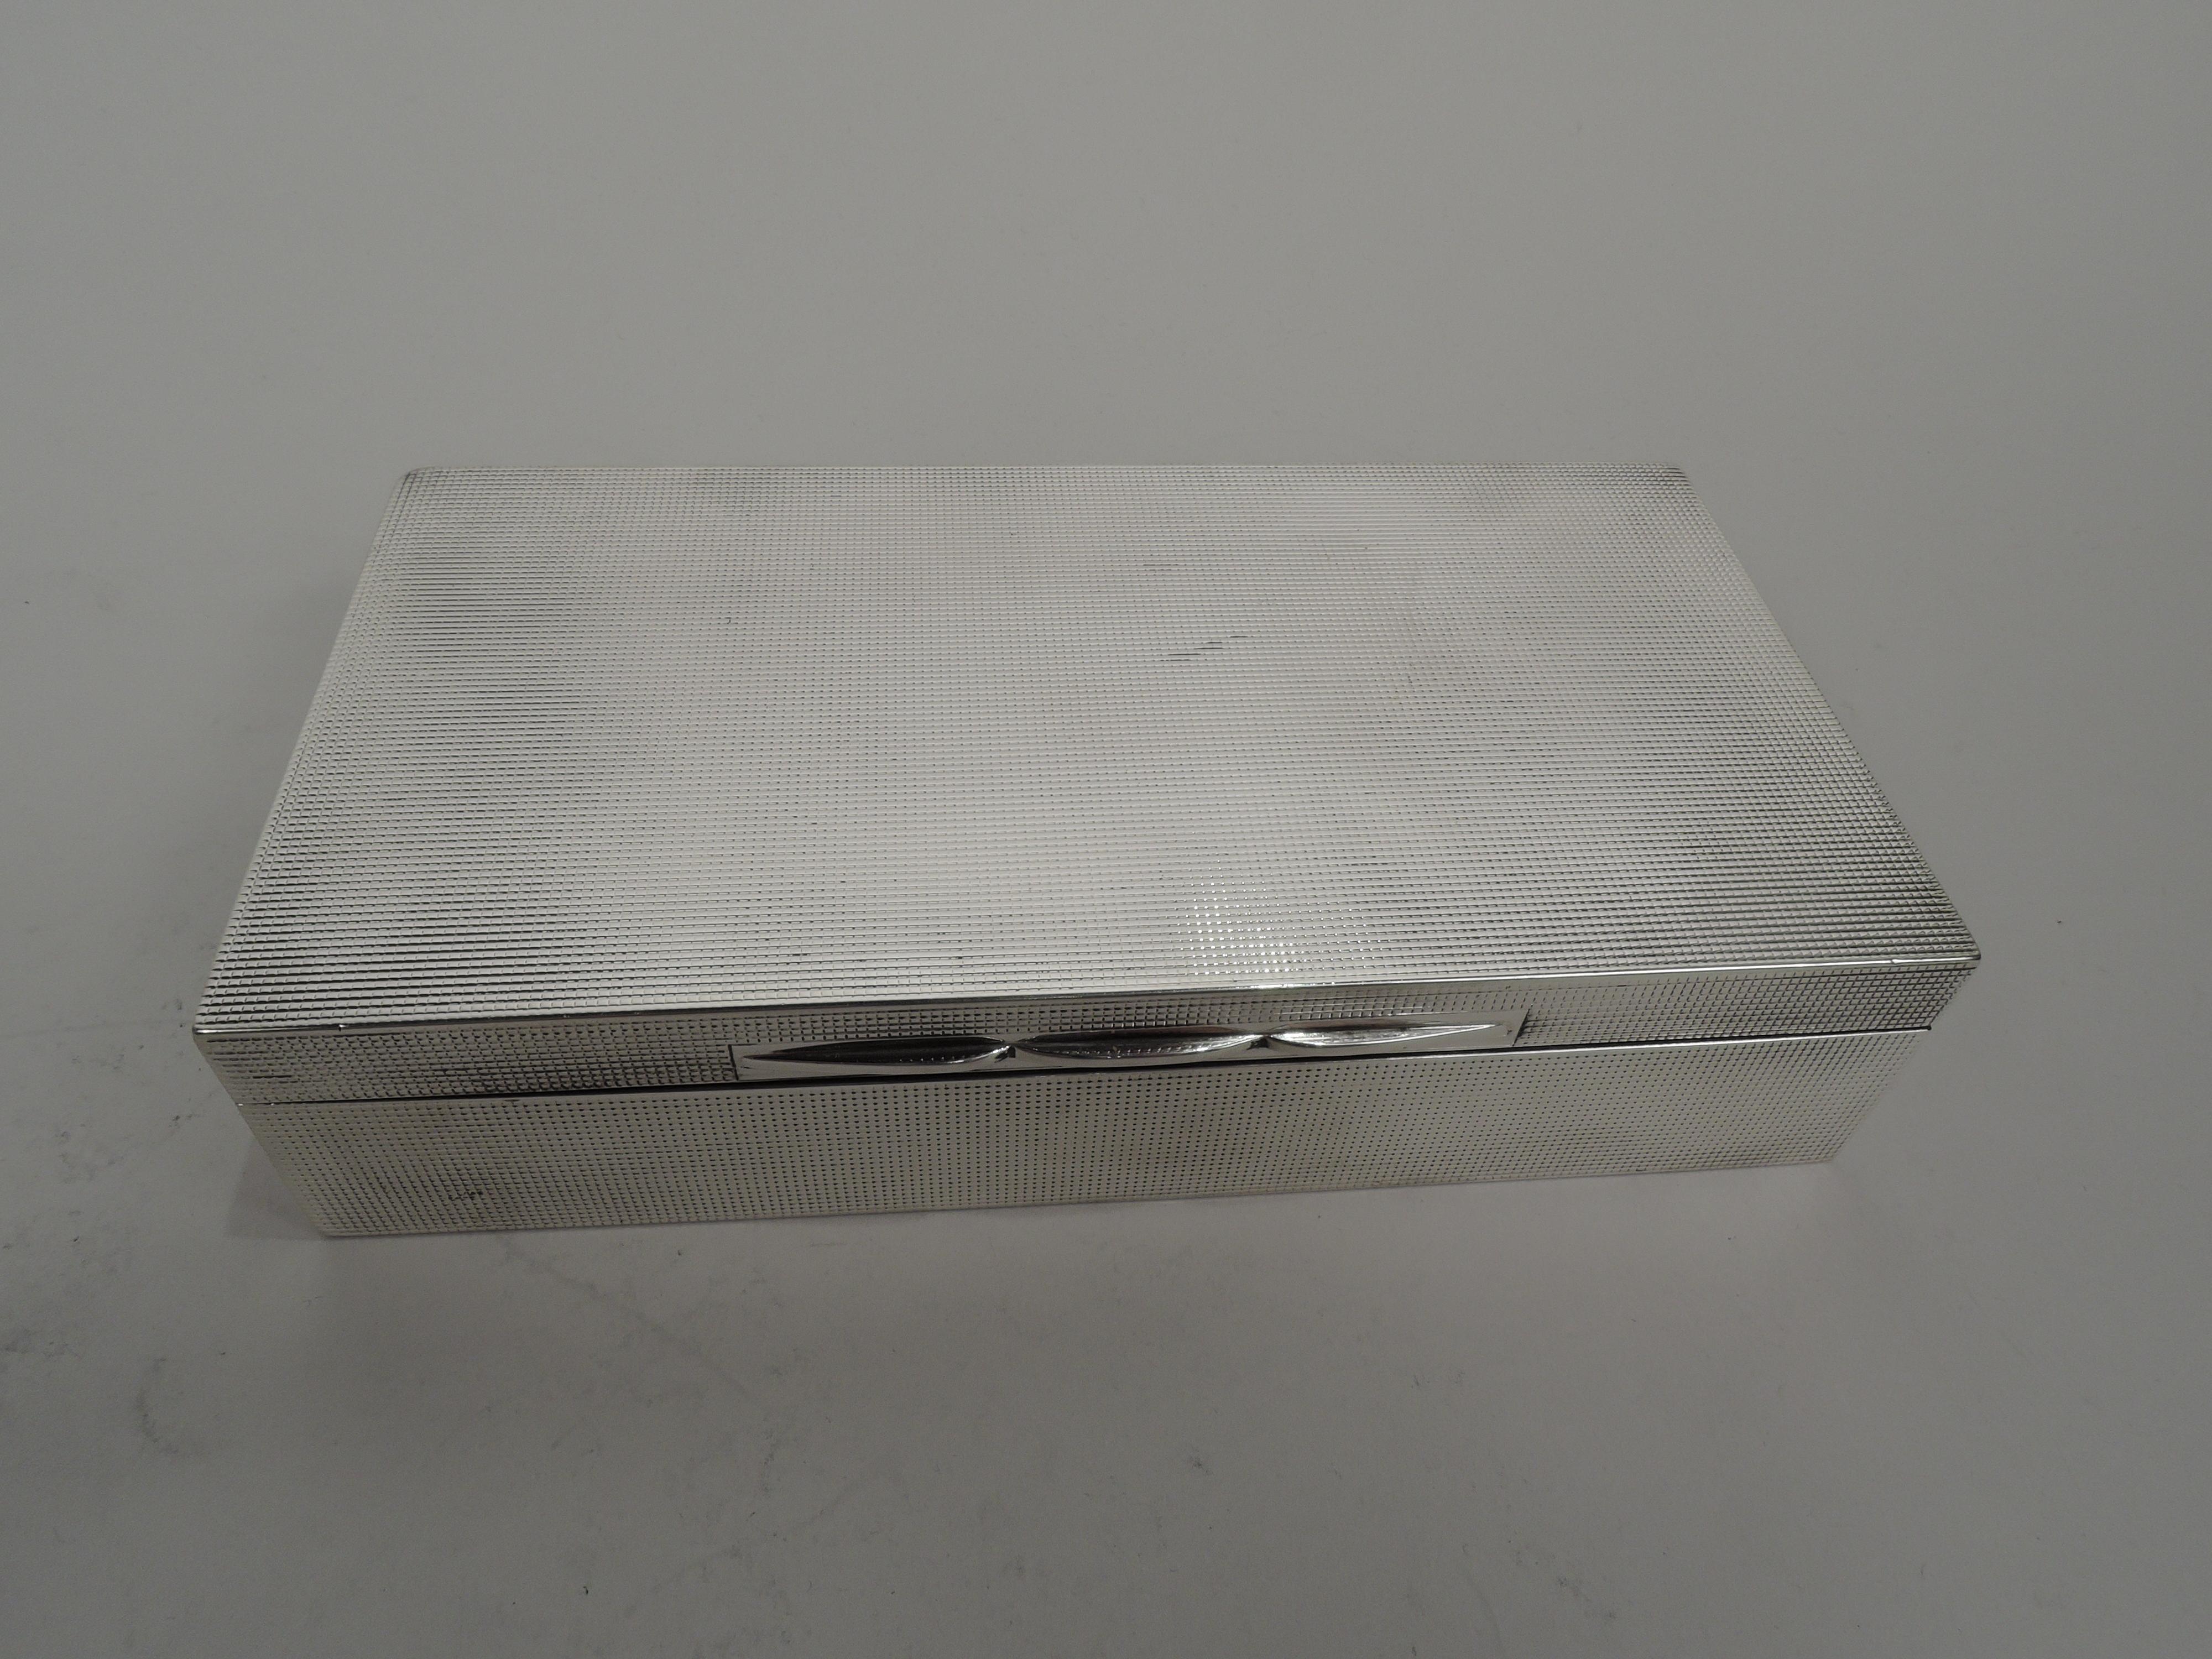 Edward VIII sterling silver box. Made by A. Wilcox in Birmingham in 1936. Rectangular with straight sides. Cover flat and hinged with triple tabs. Allover fine engine-turned grid ornament. Wood-lined interior. Open leather-lined underside. Fully